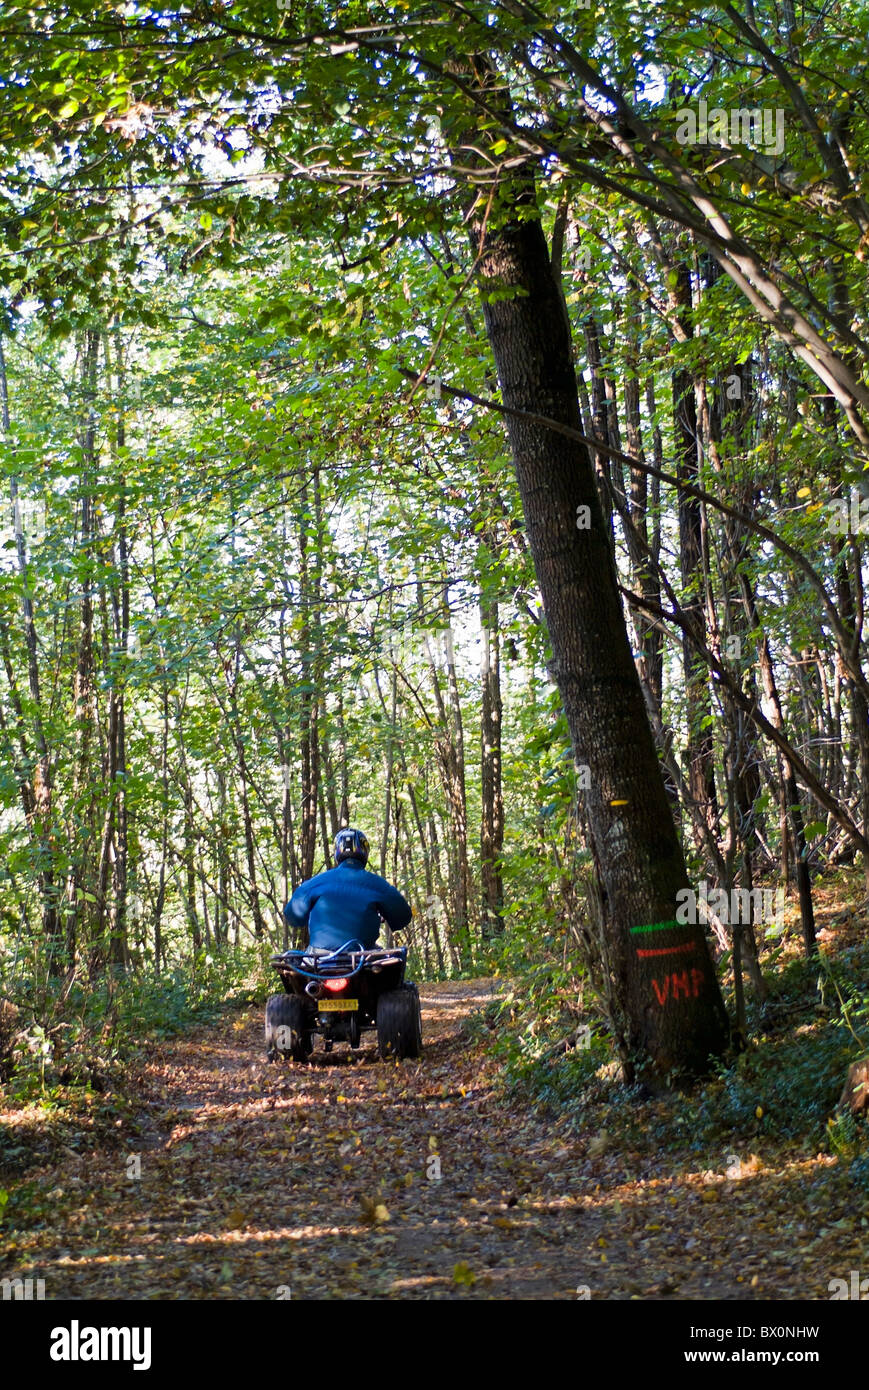 Person riding alone on a quad bike through a forest during autumn, France. Stock Photo